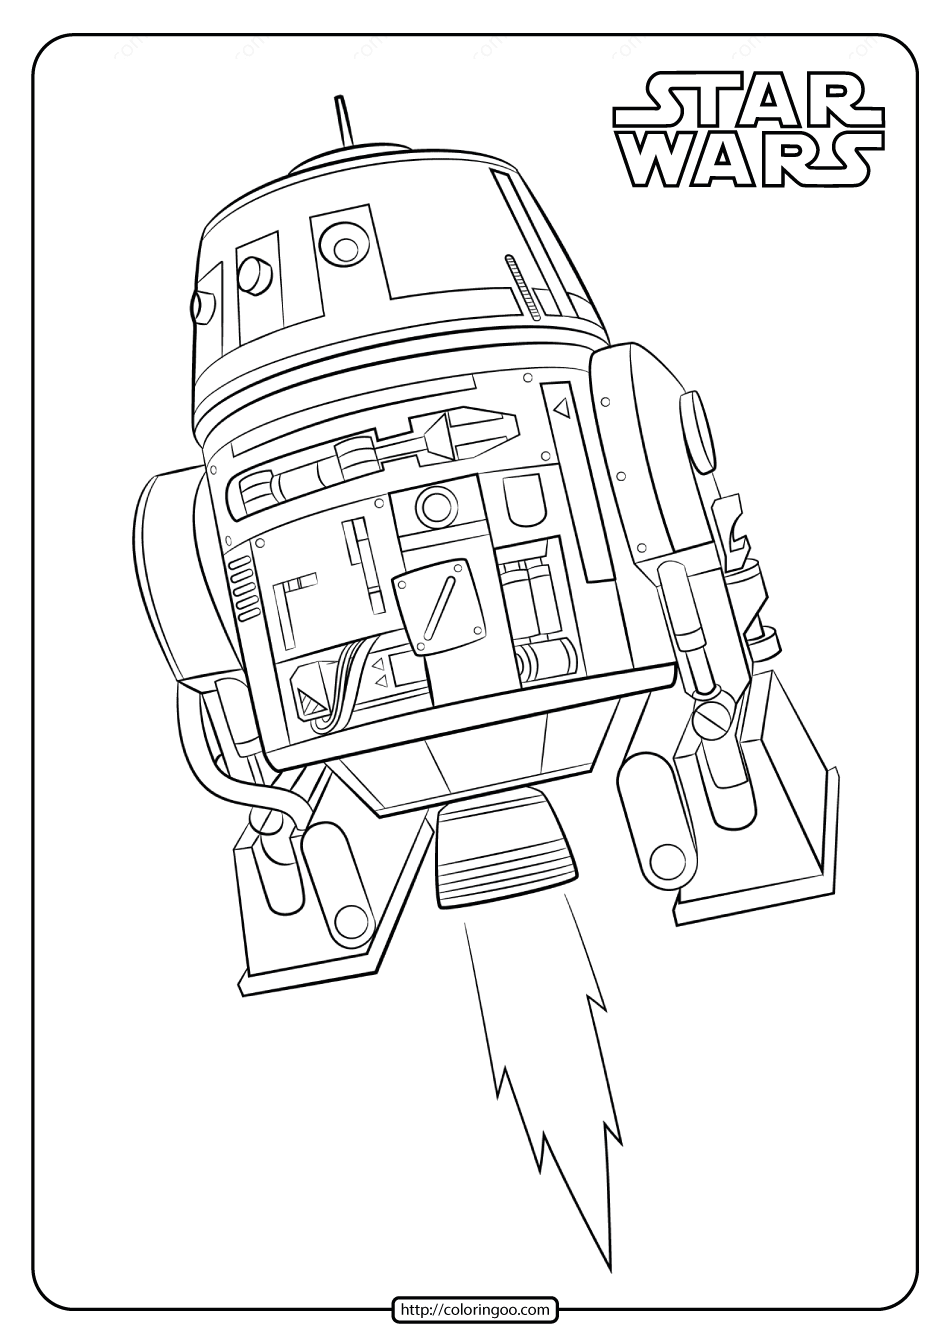 Printable Star Wars R2D2 Coloring Pages